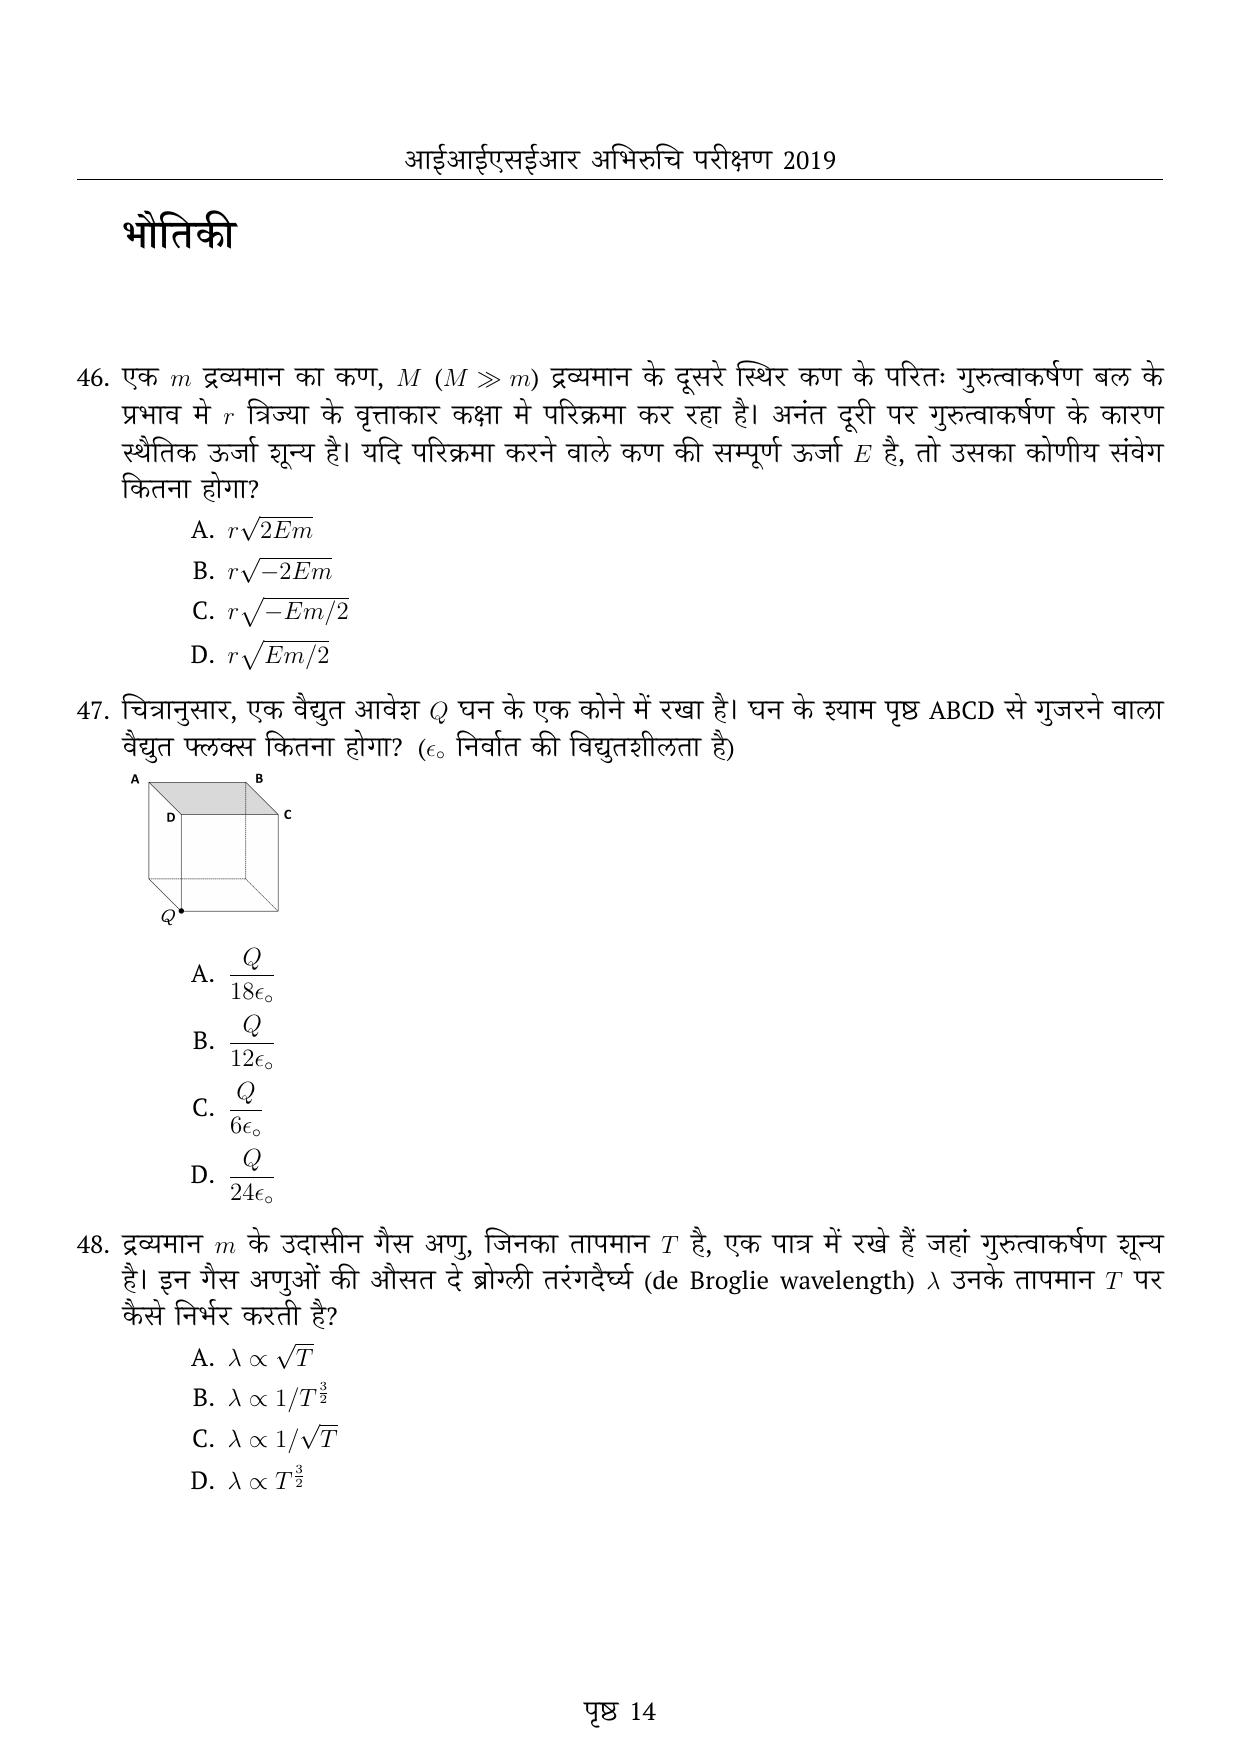 IISER Aptitude Test 2019 Hindi Question Paper - Page 14